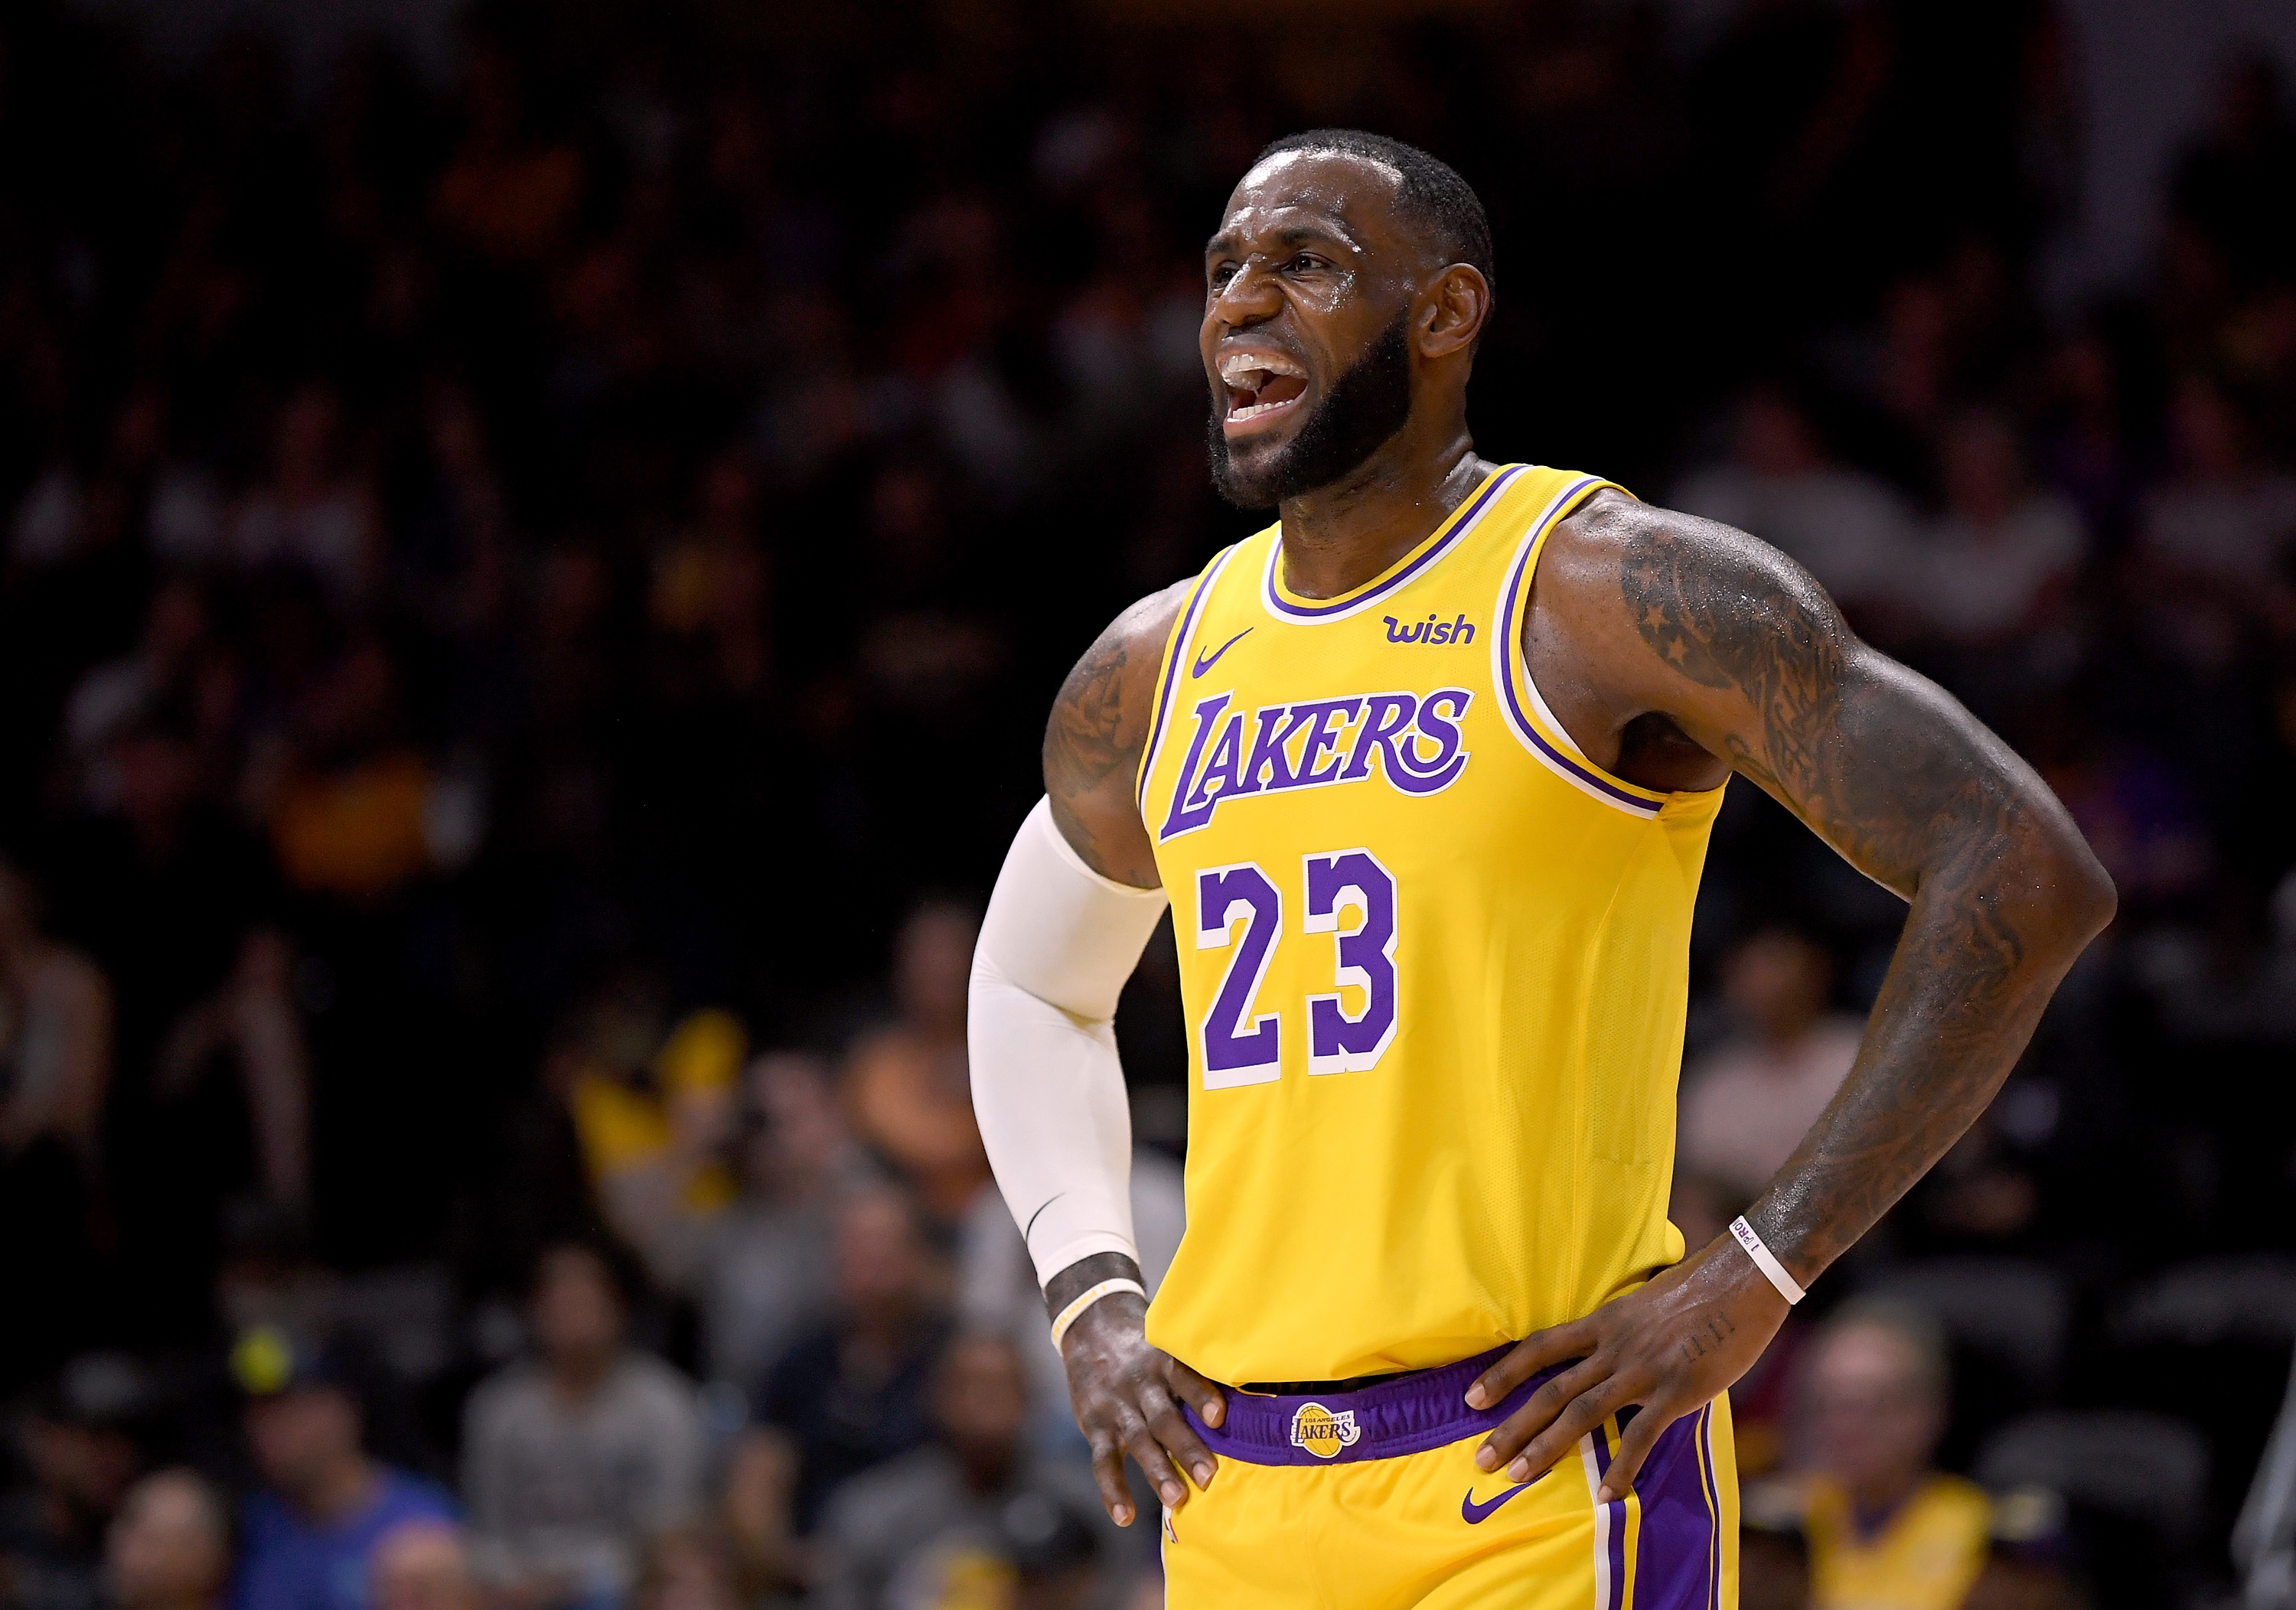 Space Jam: A New Legacy': LeBron James Reveals Tune Squad Jersey